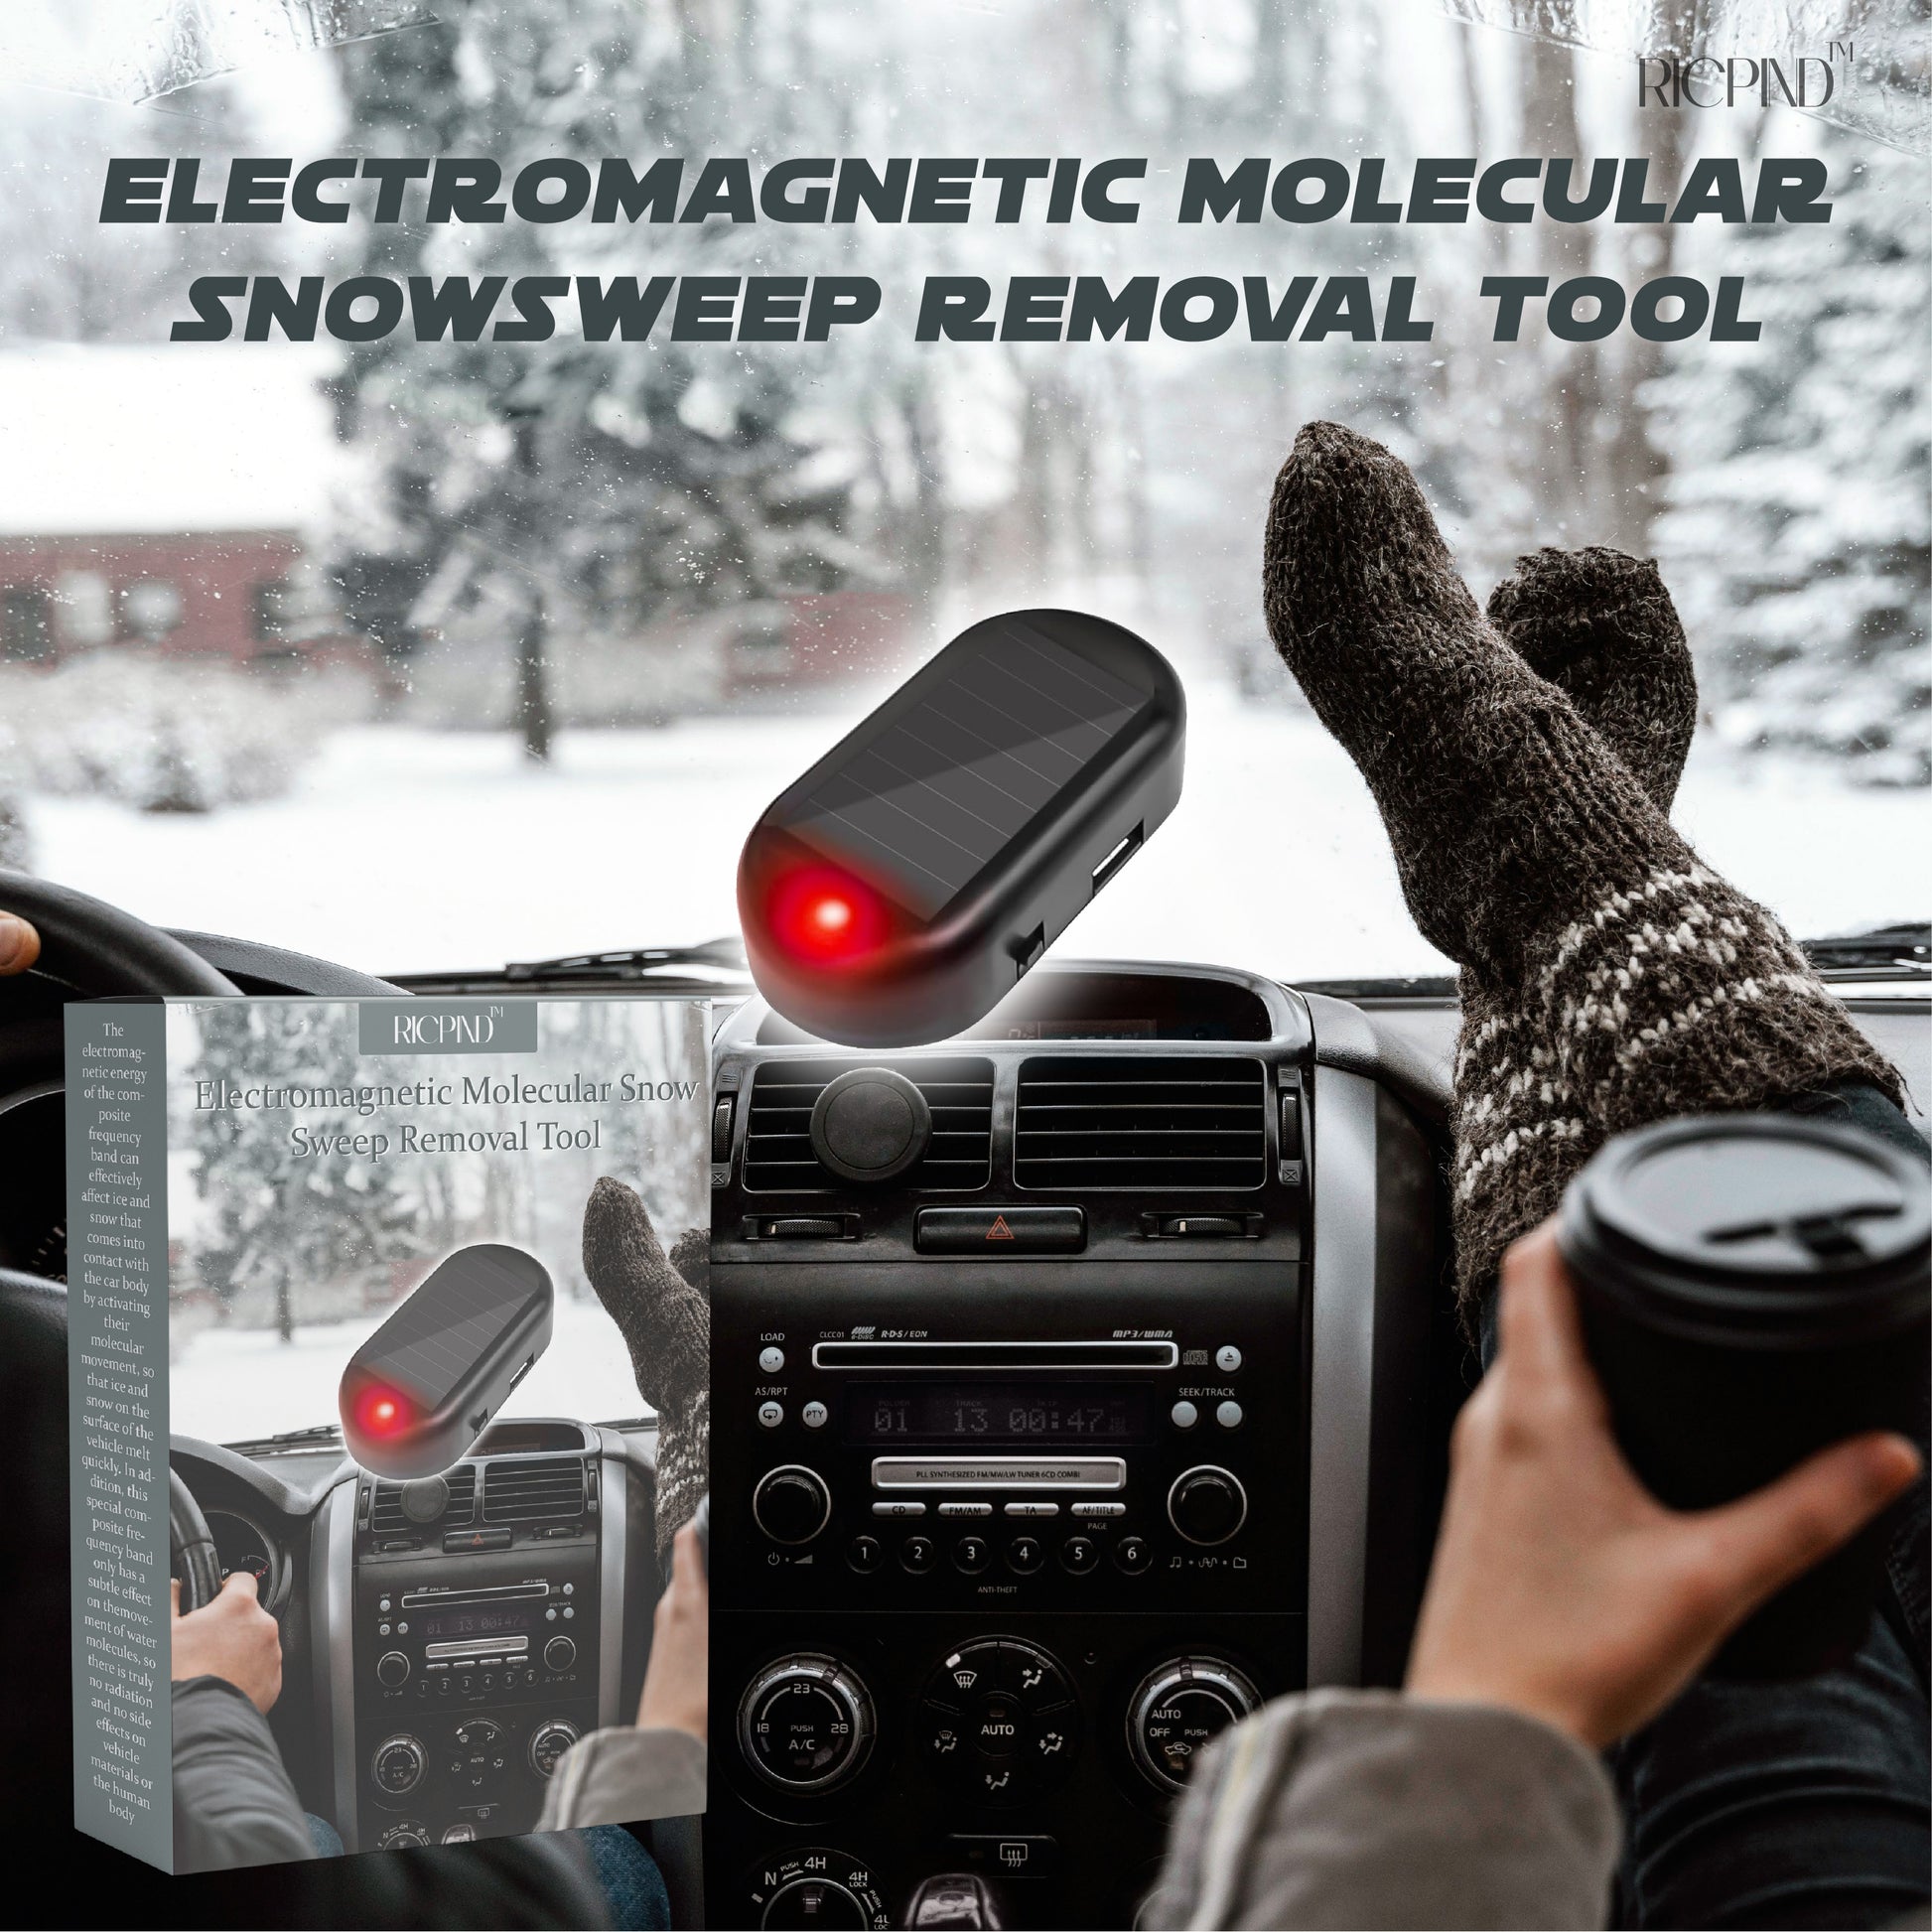 RICPIND Electromagnetic Molecular SnowSweep Removal Tool –  Einrichtungsmeister